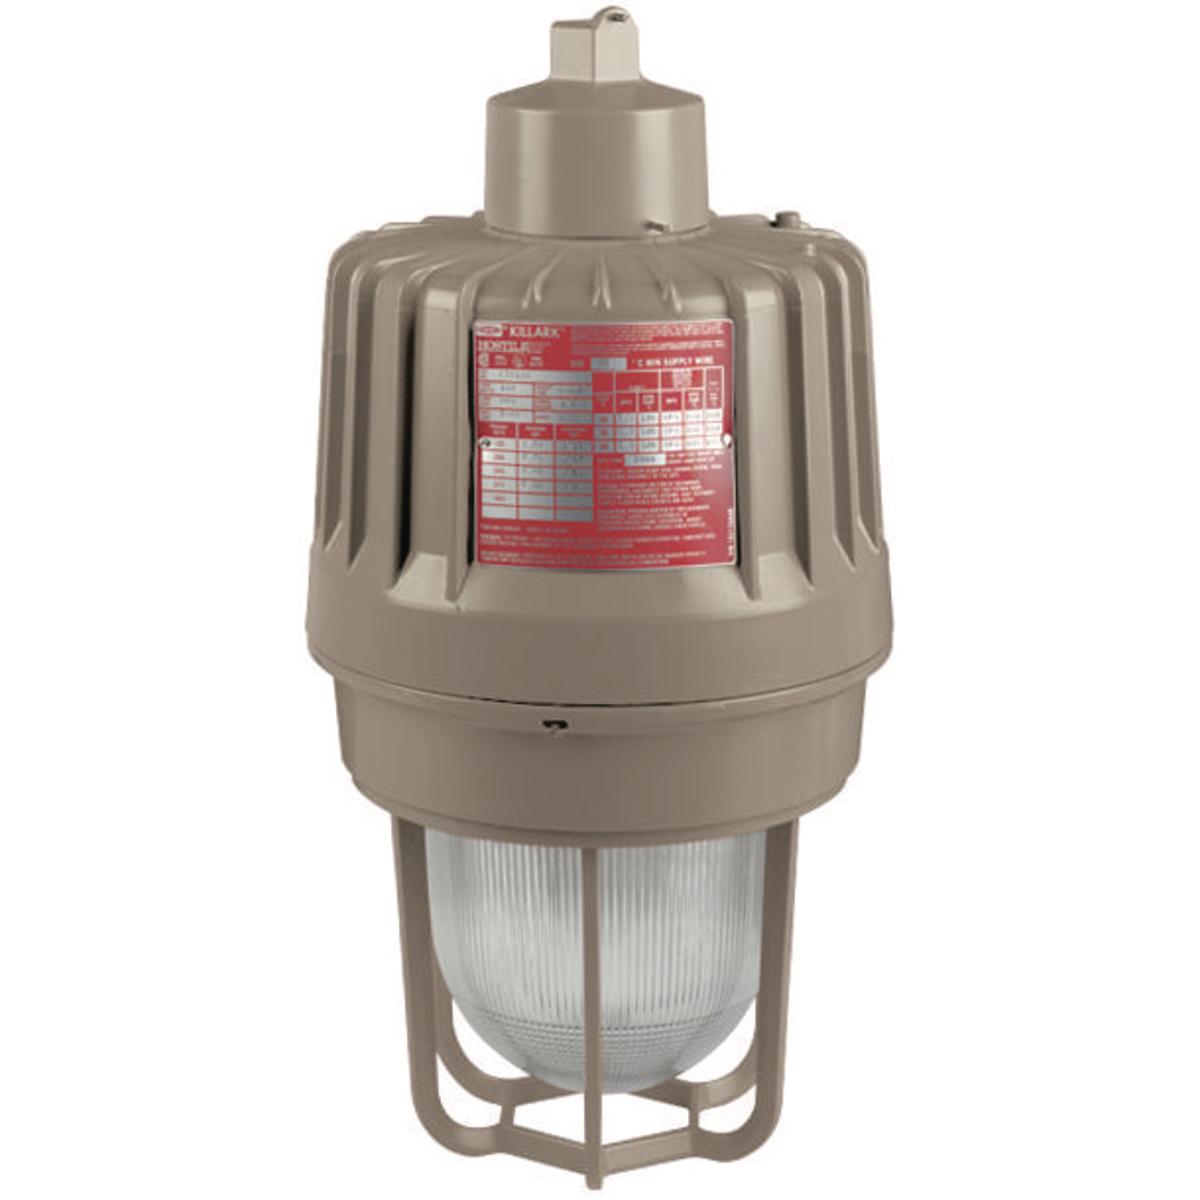 Hubbell EZP250A2G 250W Quadri-Volt Pulse-Start Metal Halide 3/4" Pendant with Guard  ; Three light sources – High Pressure Sodium (50-400W), Metal Halide (70-400W) and Pulse Start Metal Halide (175-400W) ; Mounting choice –Pendant, ceiling, 25˚ stanchion or 90˚ wall mount,